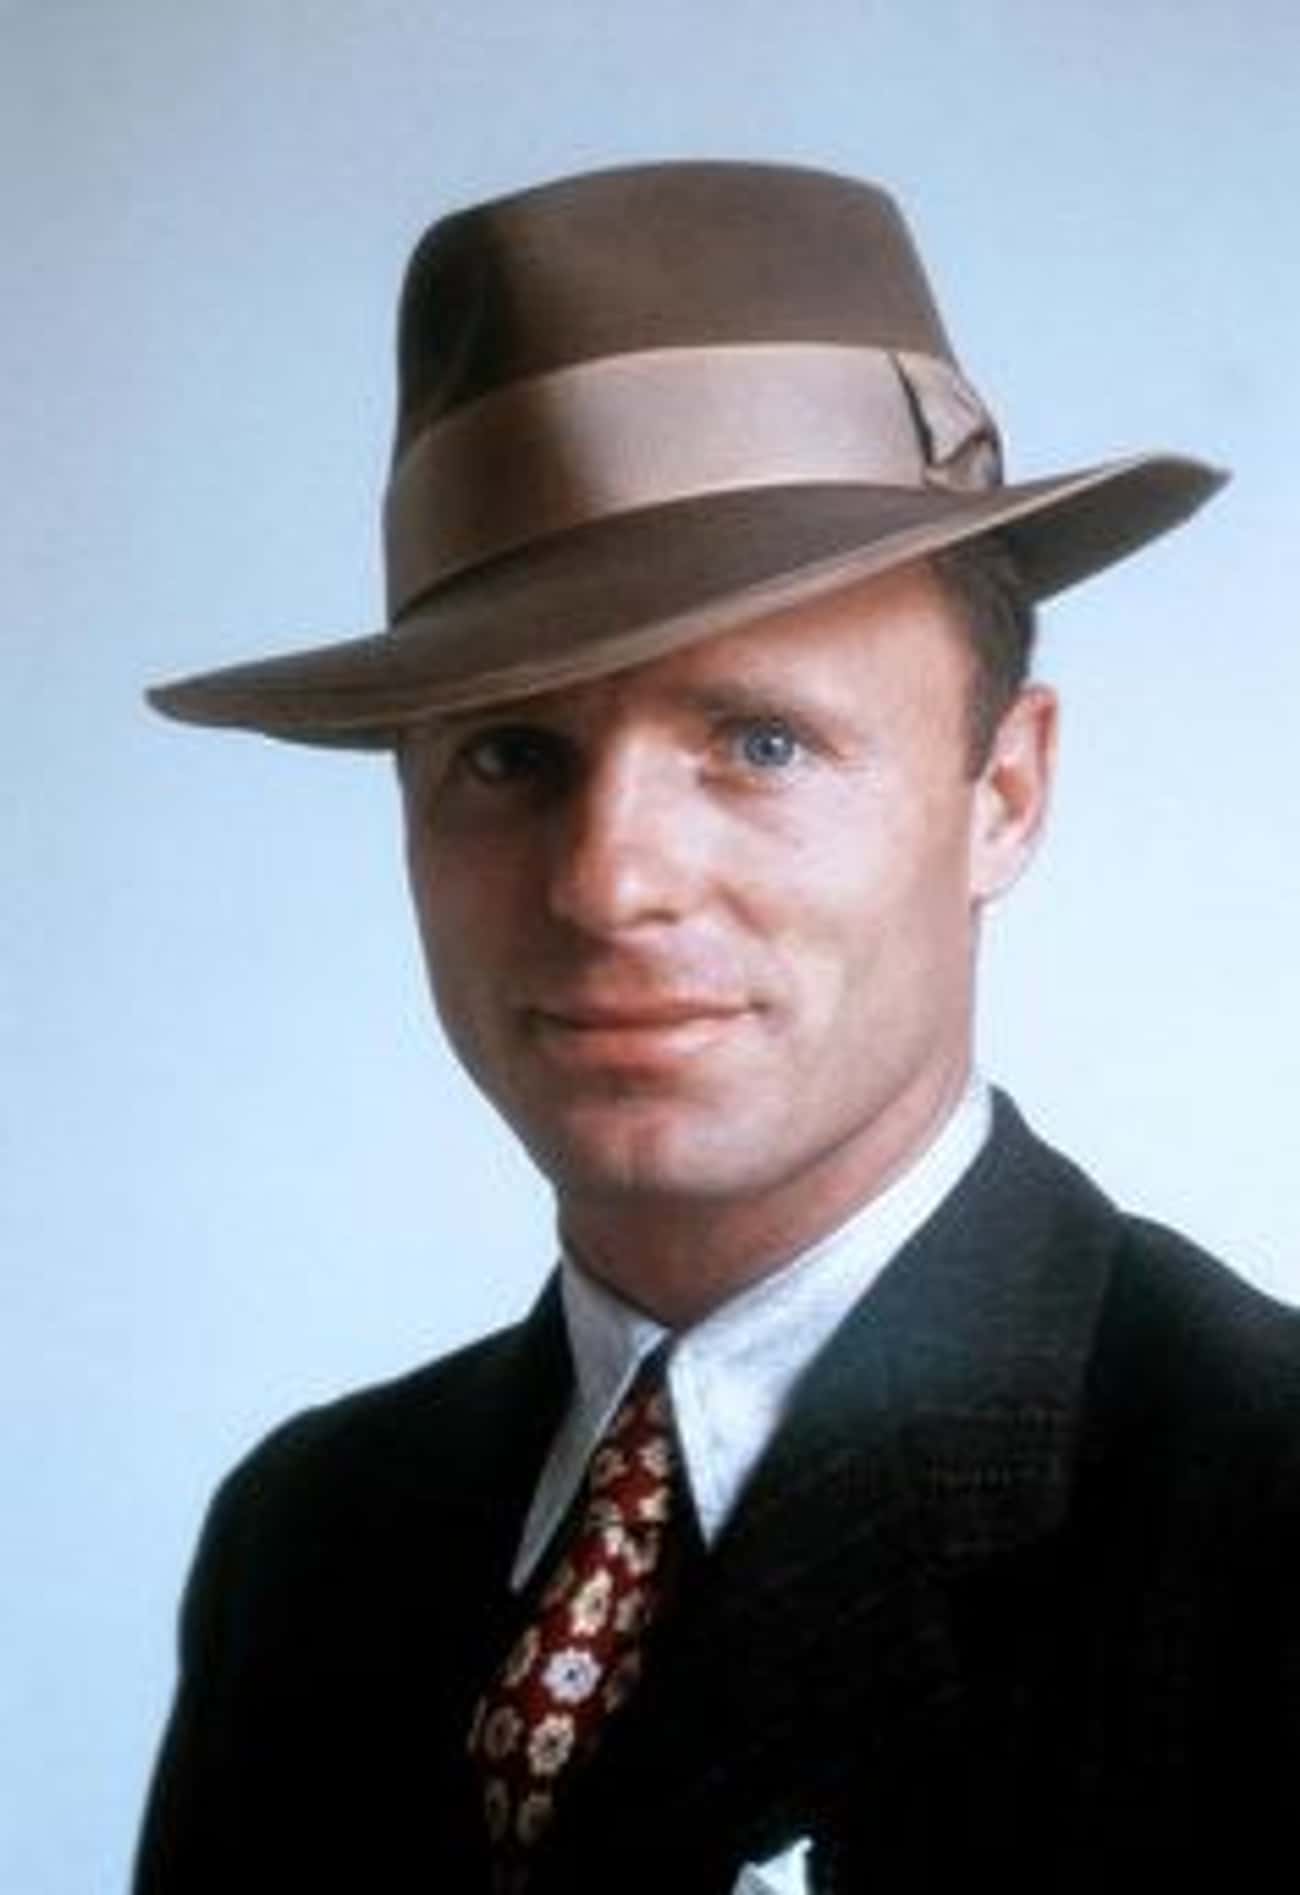 Young Ed Harris in Suit, Tie and Brown Hat